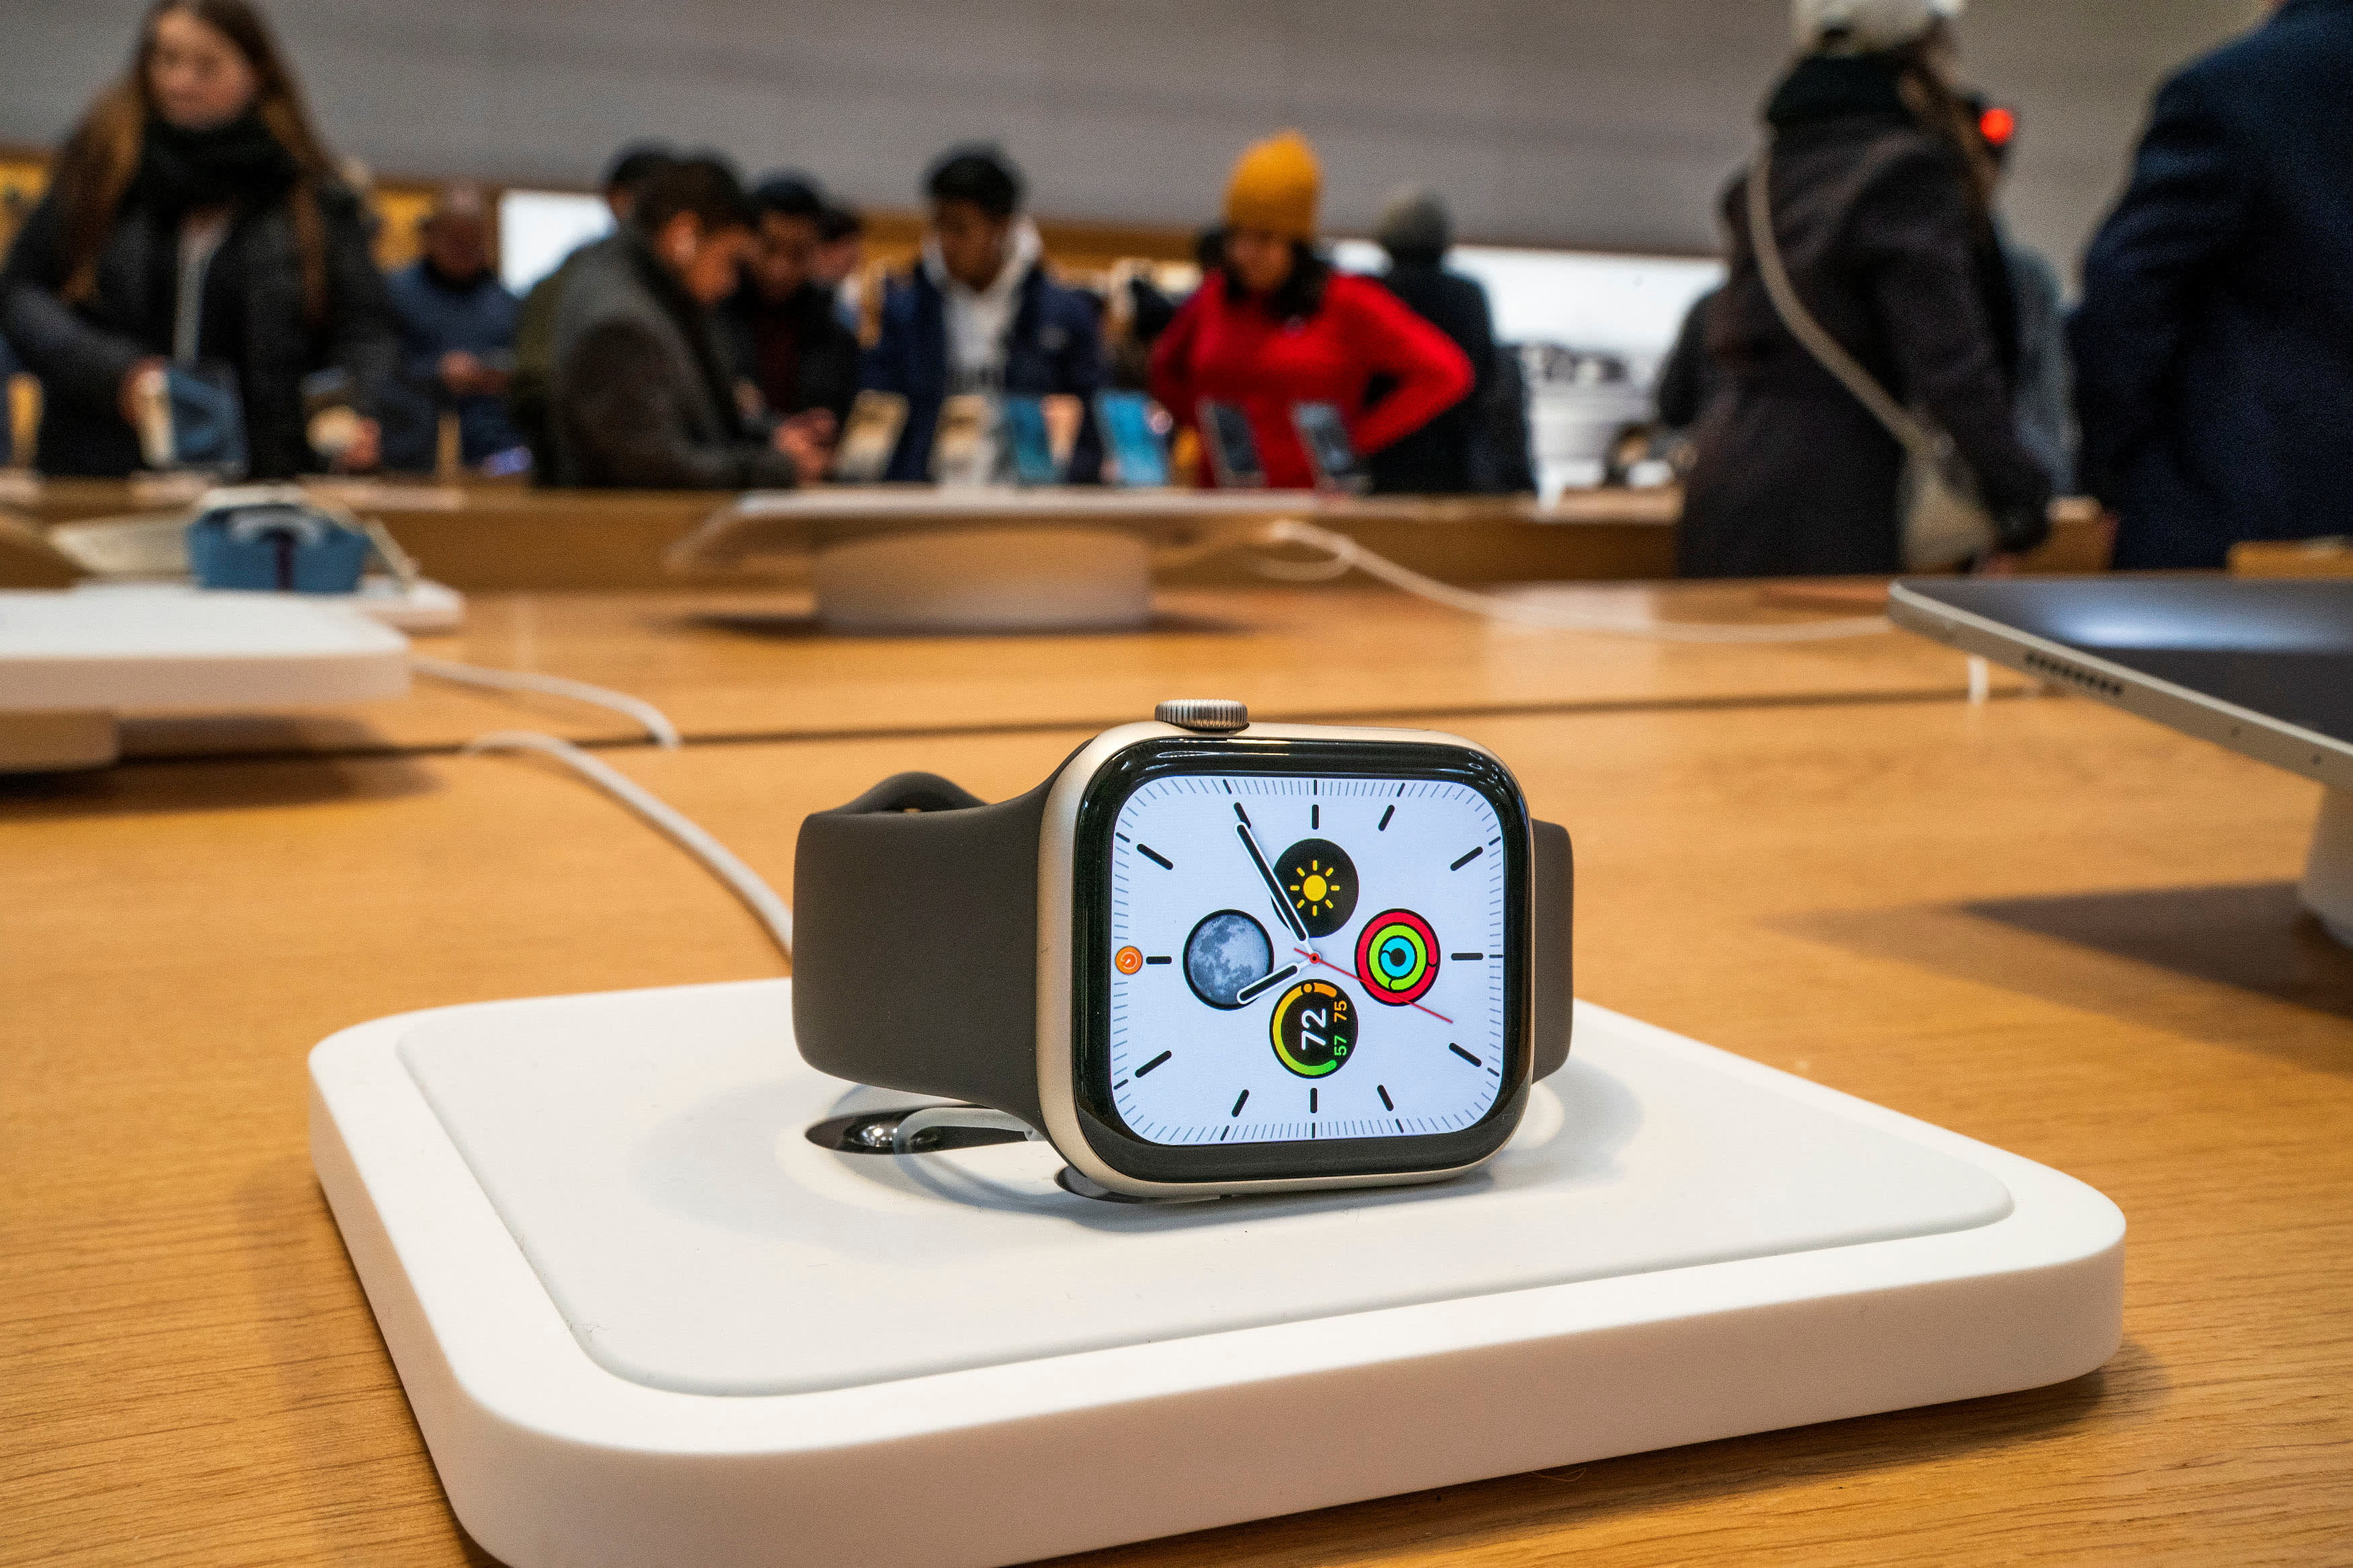 Apple Watch import ban temporarily stopped by U.S. appeals court